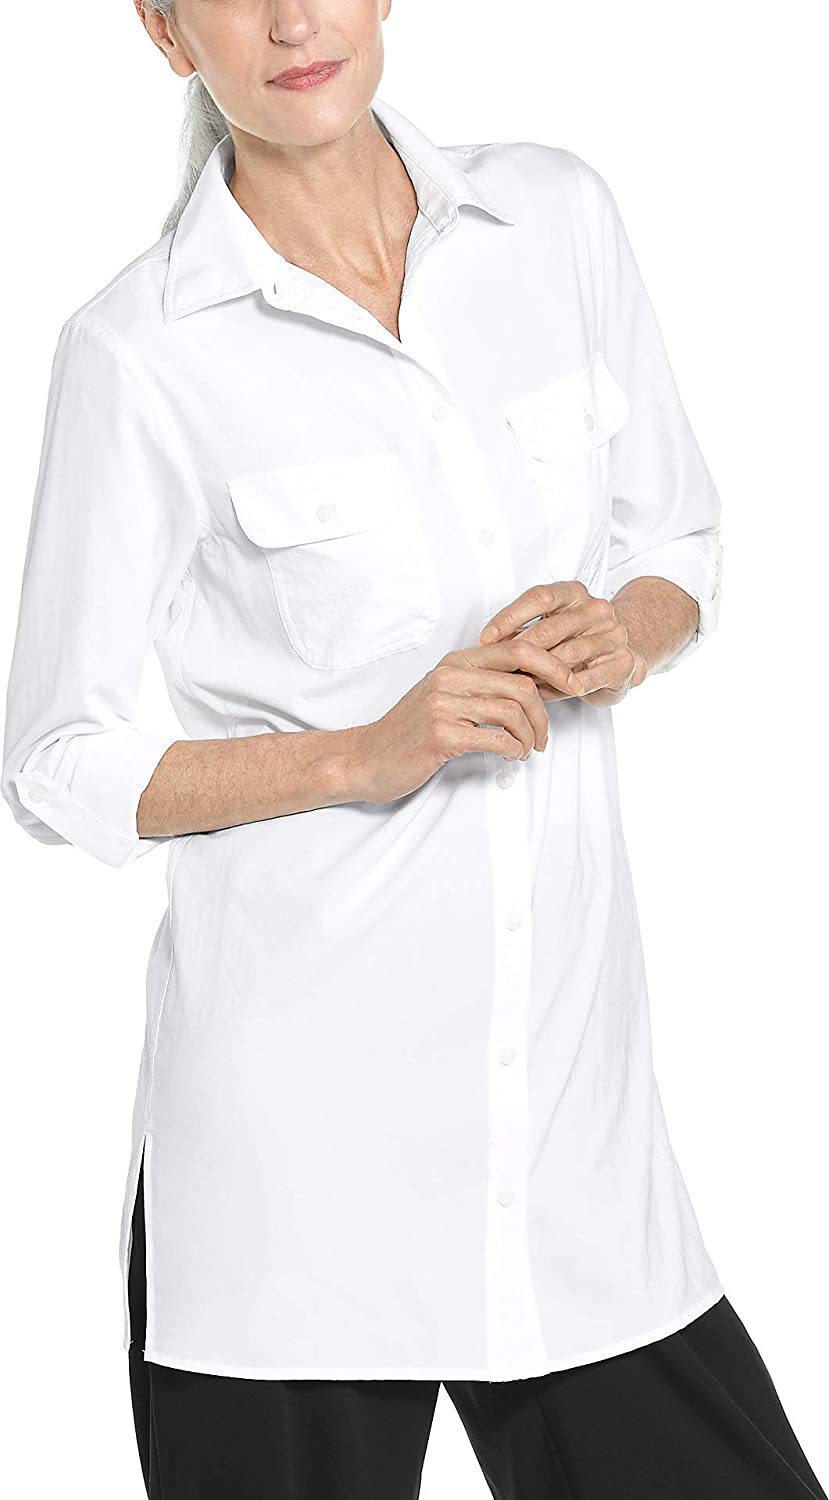 SANTORINI TUNIC SHIRT (COULD NOT FIND THE OTHER TWO) - Molly's! A Chic and Unique Boutique 